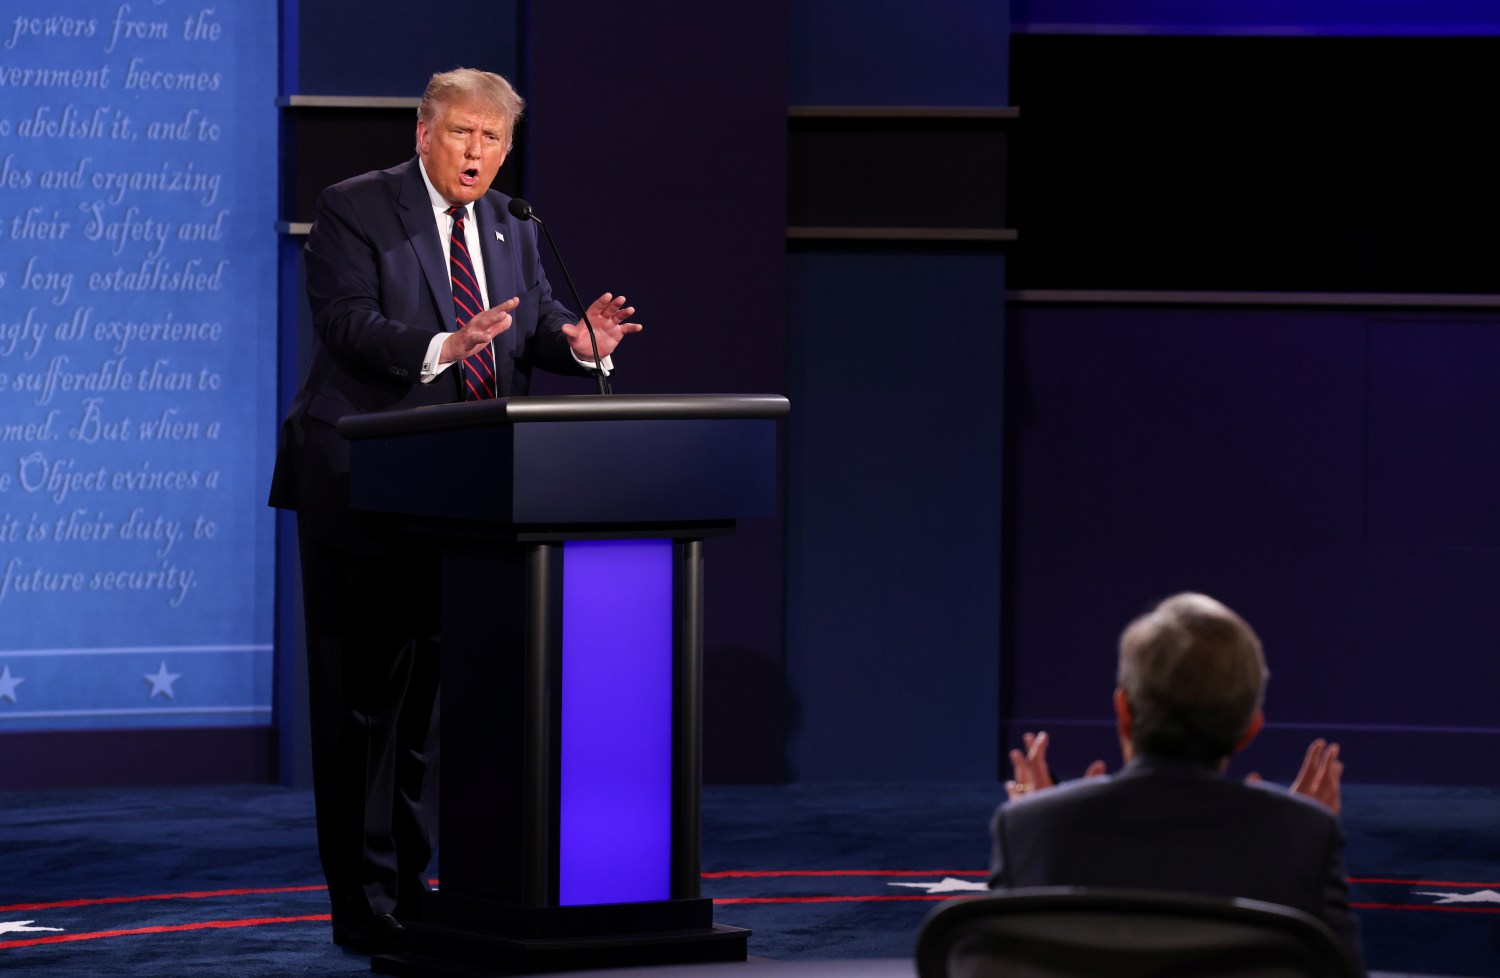 President Donald Trump argues with debate moderator Chris Wallace of Fox News Channel during the first 2020 presidential campaign debate with Democratic presidential nominee Joe Biden held on the campus of the Cleveland Clinic at Case Western Reserve University in Cleveland, Ohio, U.S., September 29, 2020. REUTERS/Jonathan Ernst